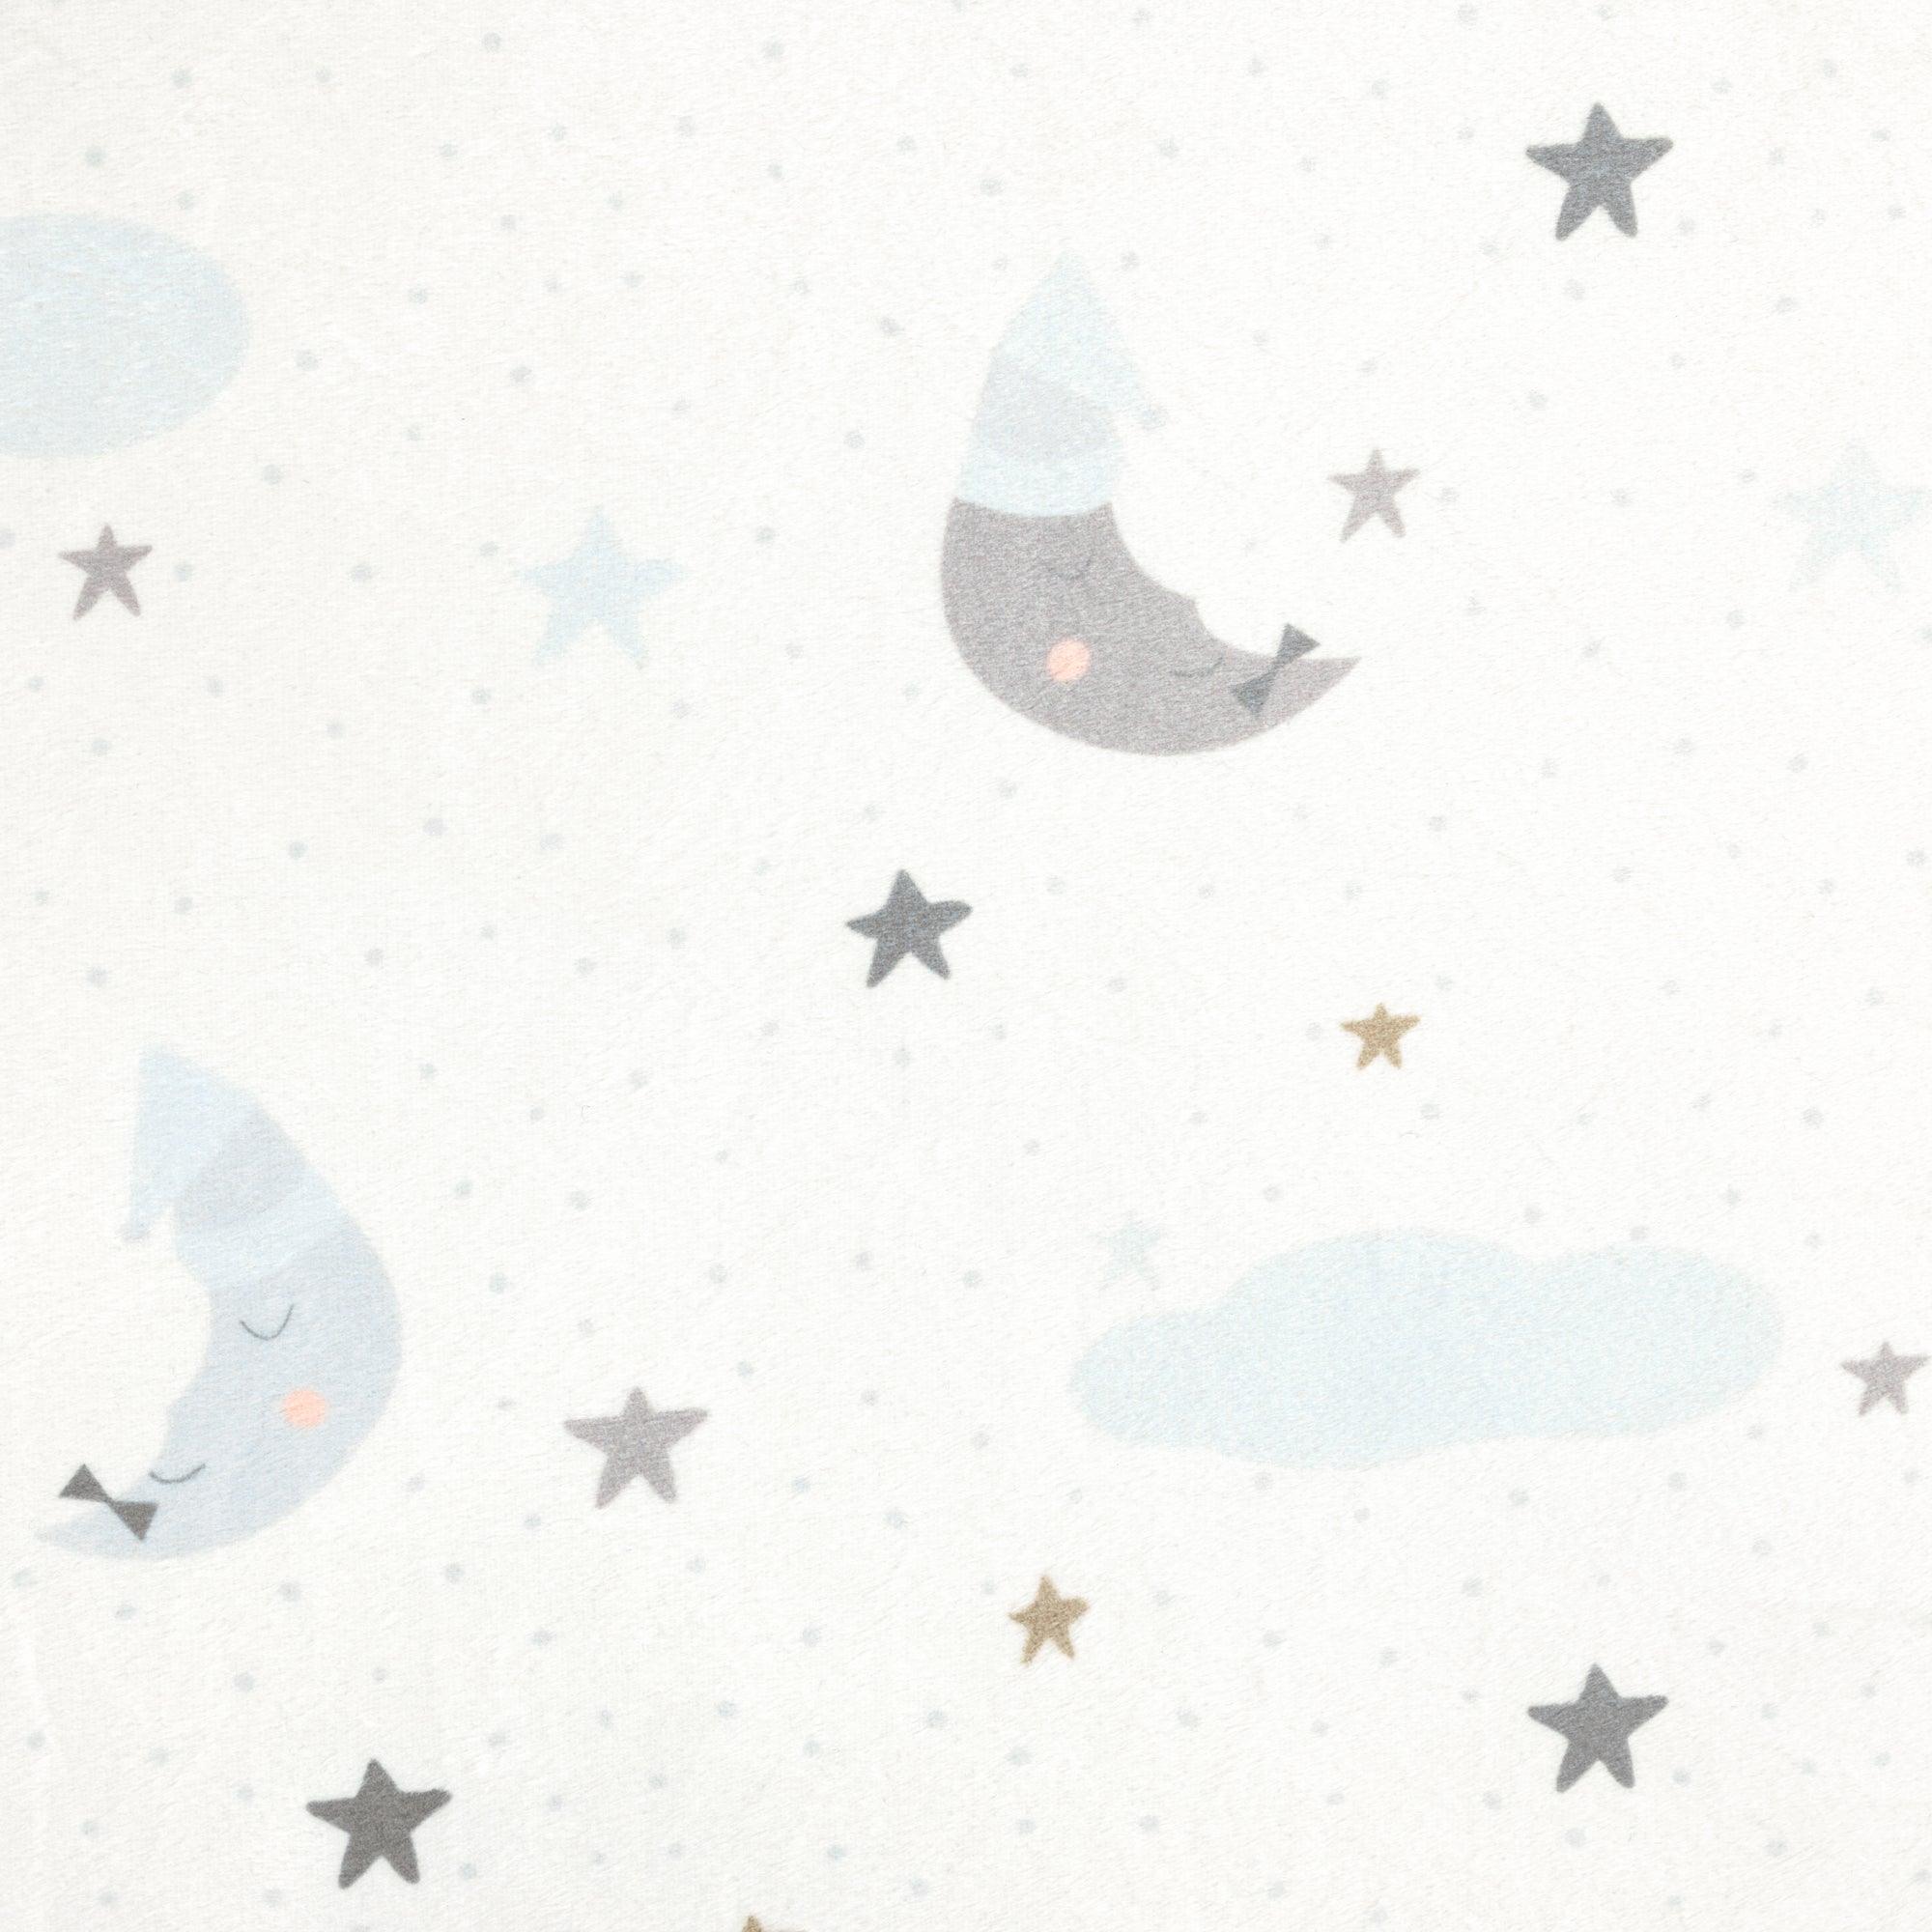 Goodnight Little Moon Soft & Plush Changing Pad Cover